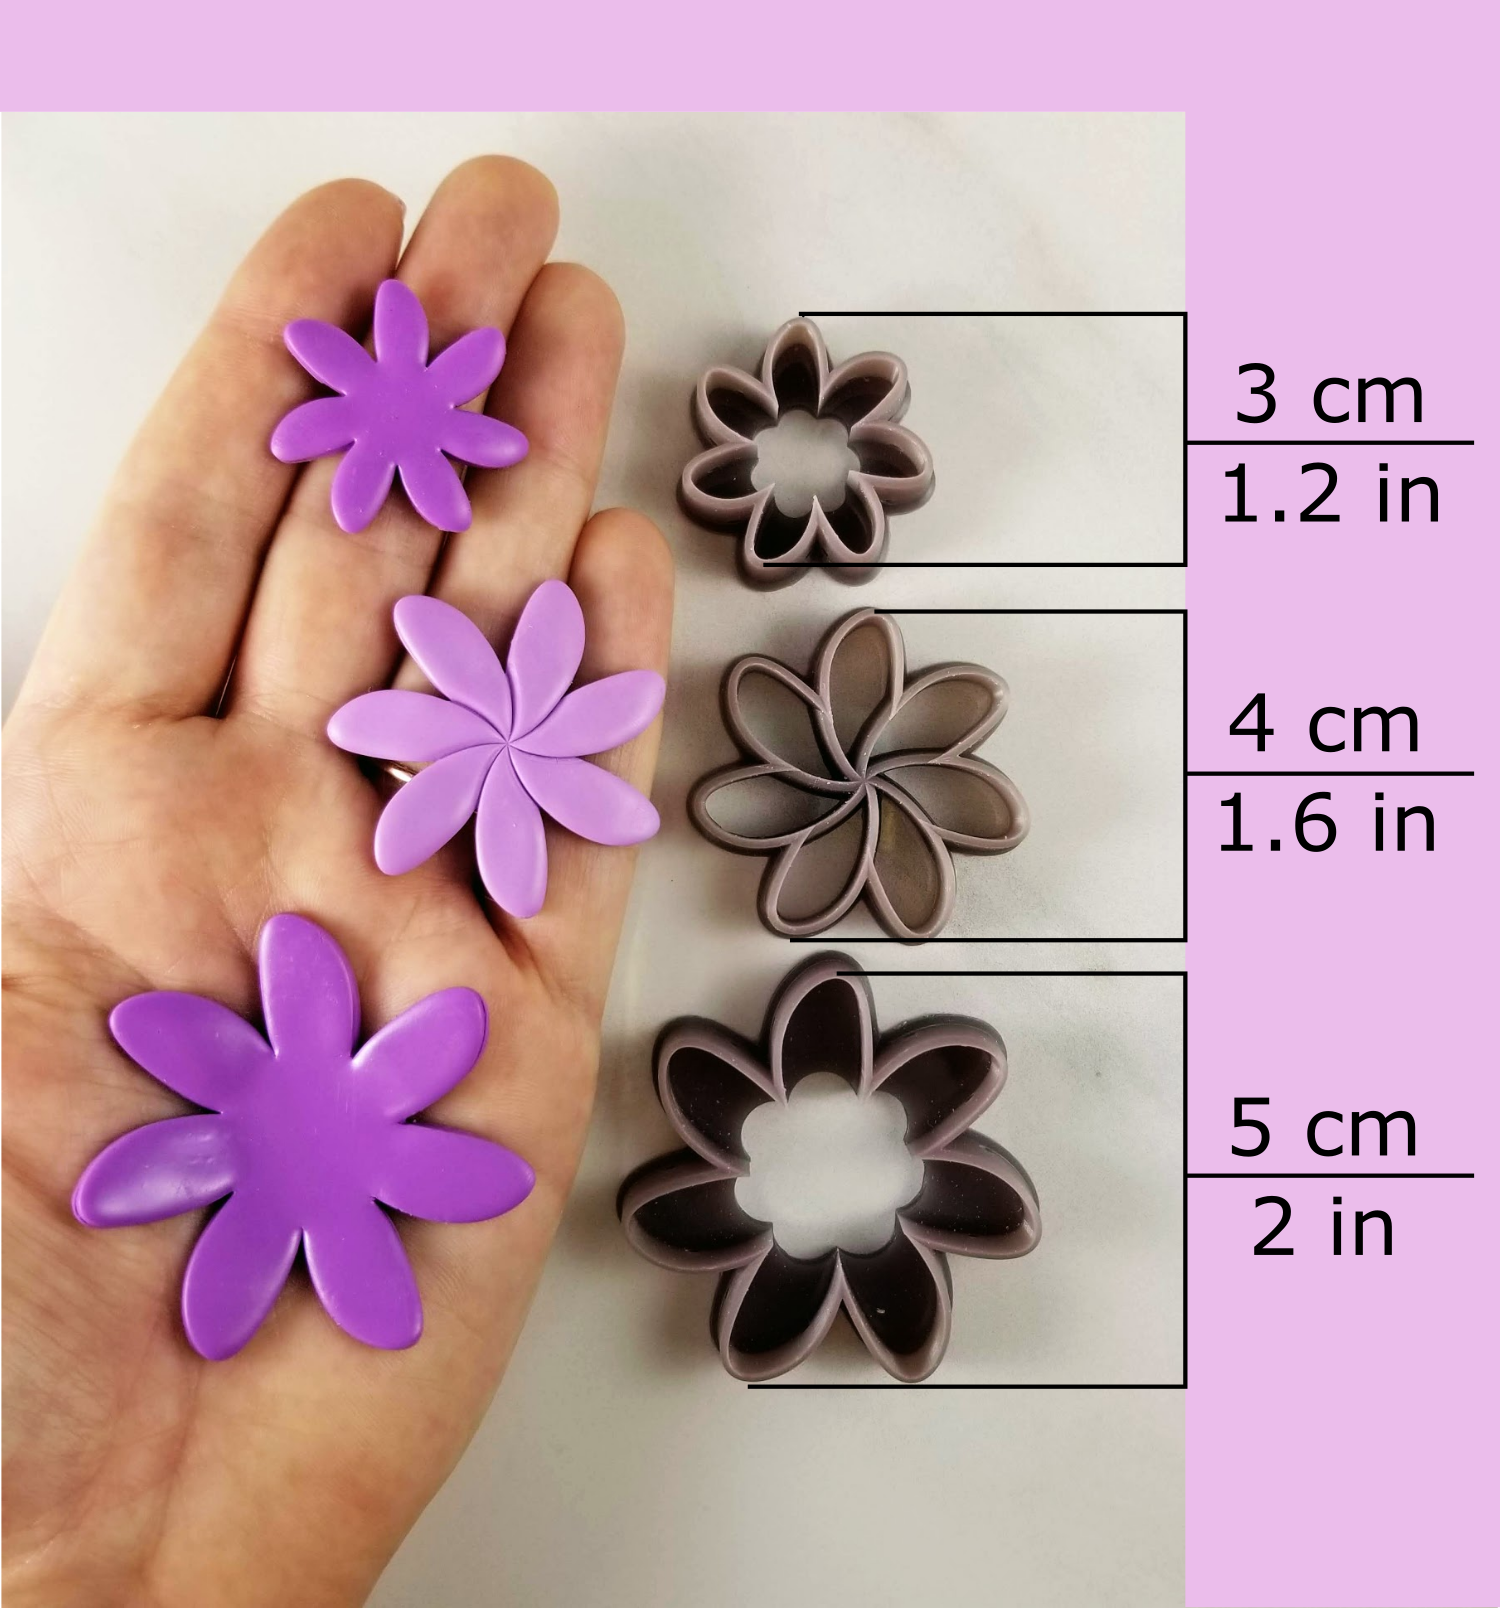 Tiare flower polymer clay cutter available sizes, 3 centimeter / 1.2 inches, 4 centimeters / 1.6 inches, 5 centimeters / 2 inches